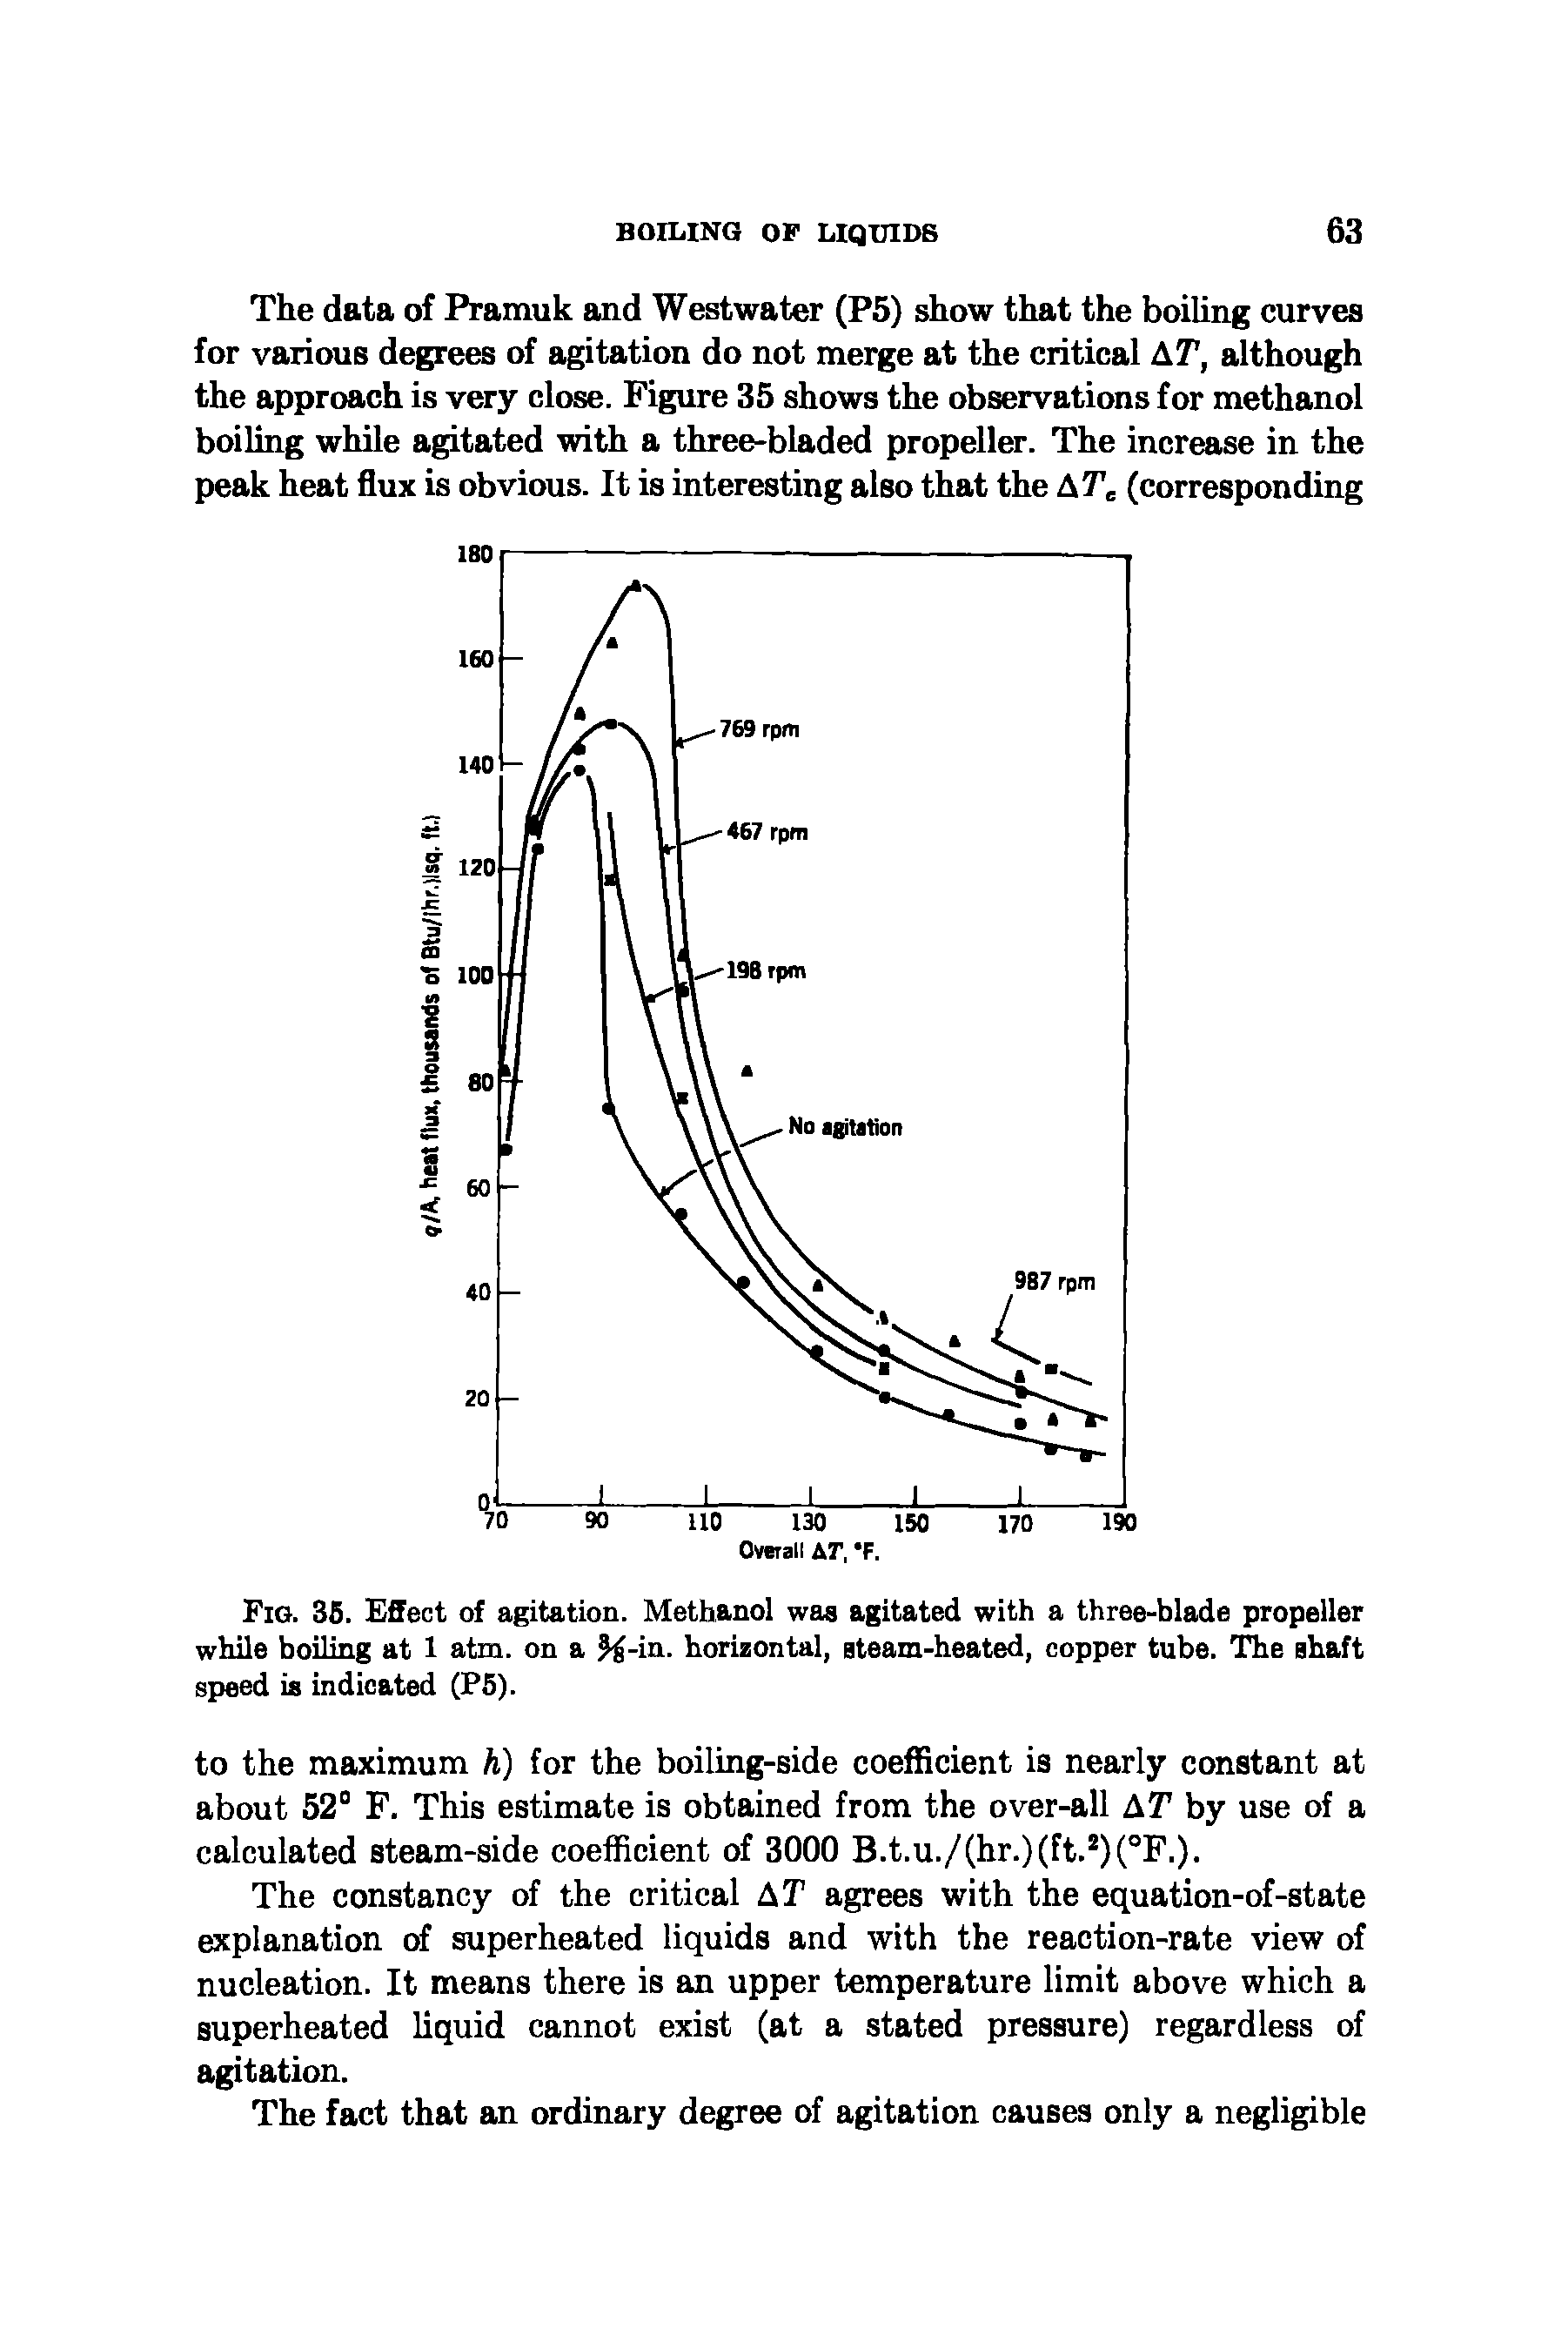 Fig. 35. Effect of agitation. Methanol was agitated with a three-blade propeller while boiling at 1 atm. on a %-in. horizontal, steam-heated, copper tube. The shaft speed is indicated (P5).